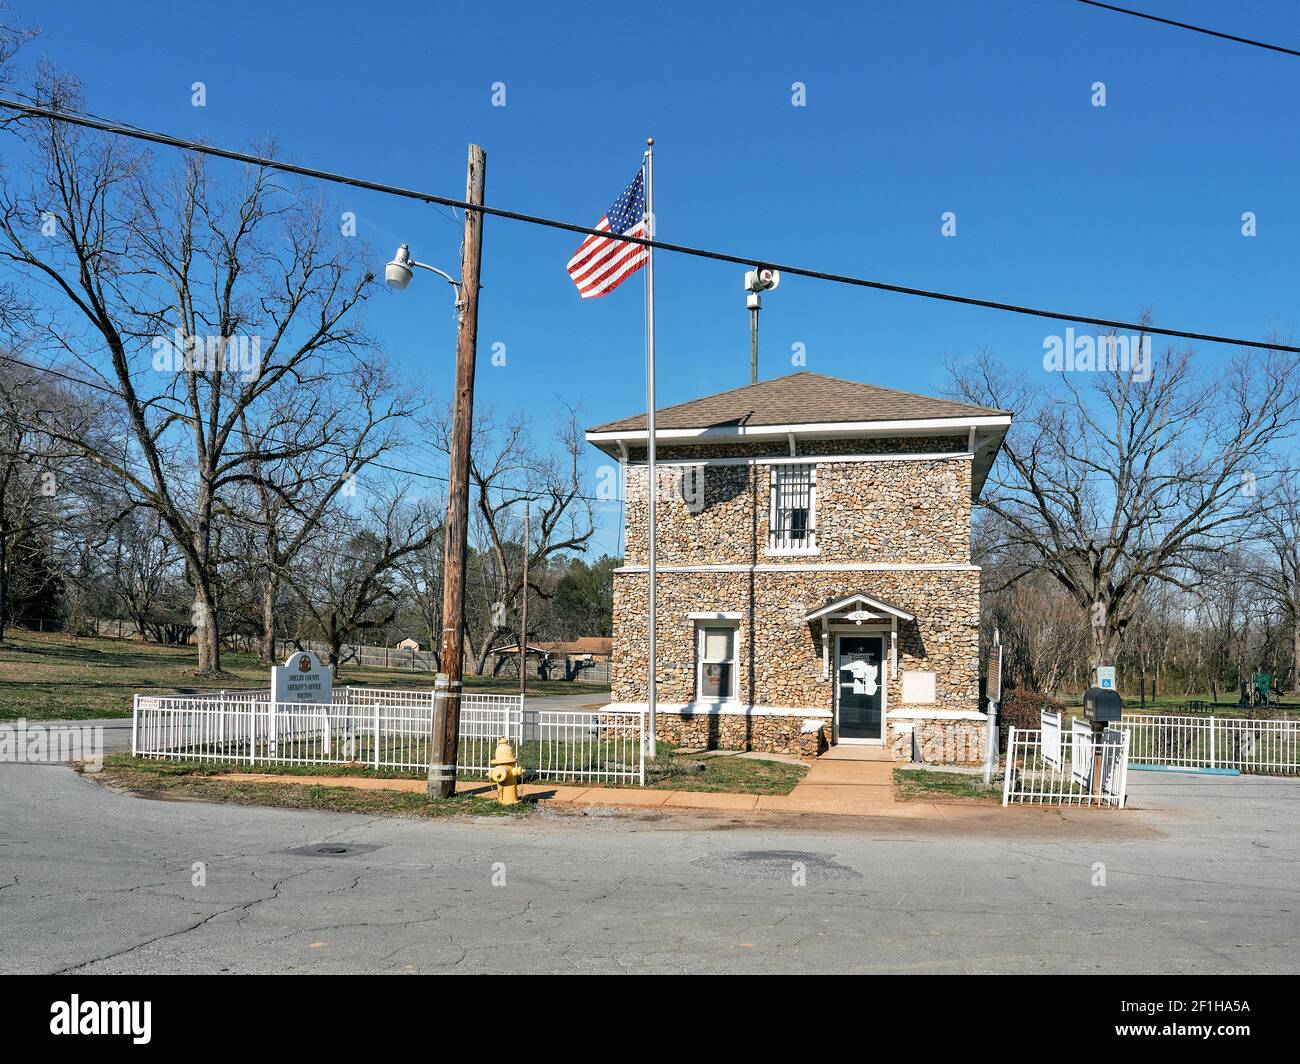 Small town city hall or town hall building exterior in Wilton, Shelby County, Alabama, USA. Stock Photo